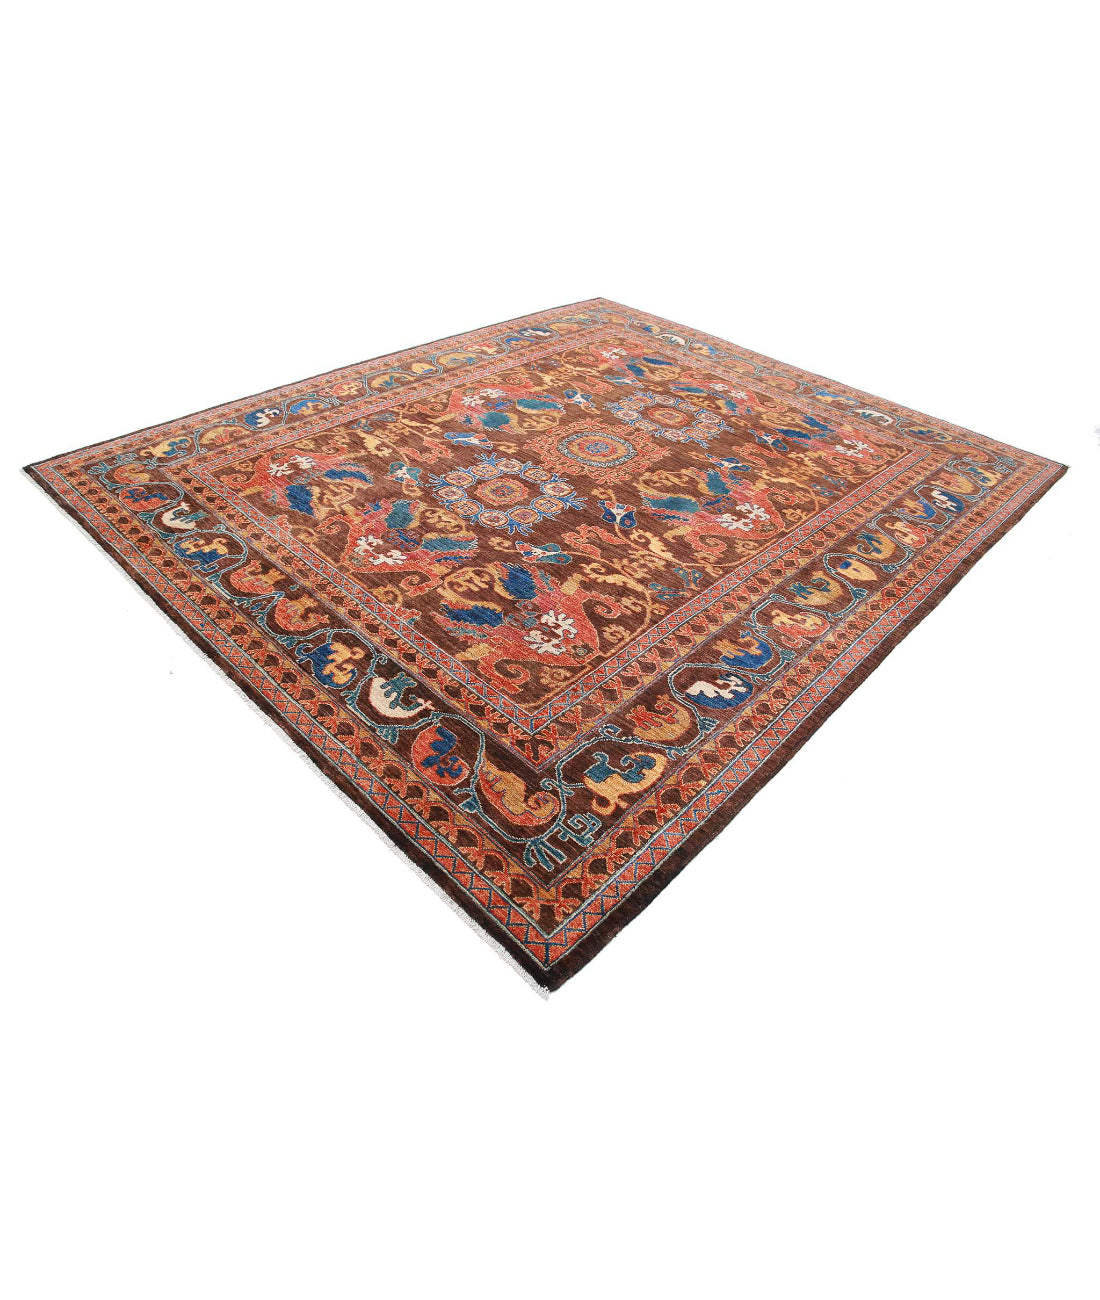 Hand Knotted Nomadic Caucasian Humna Wool Rug - 8'4'' x 9'9'' 8'4'' x 9'9'' (250 X 293) / Brown / Rust